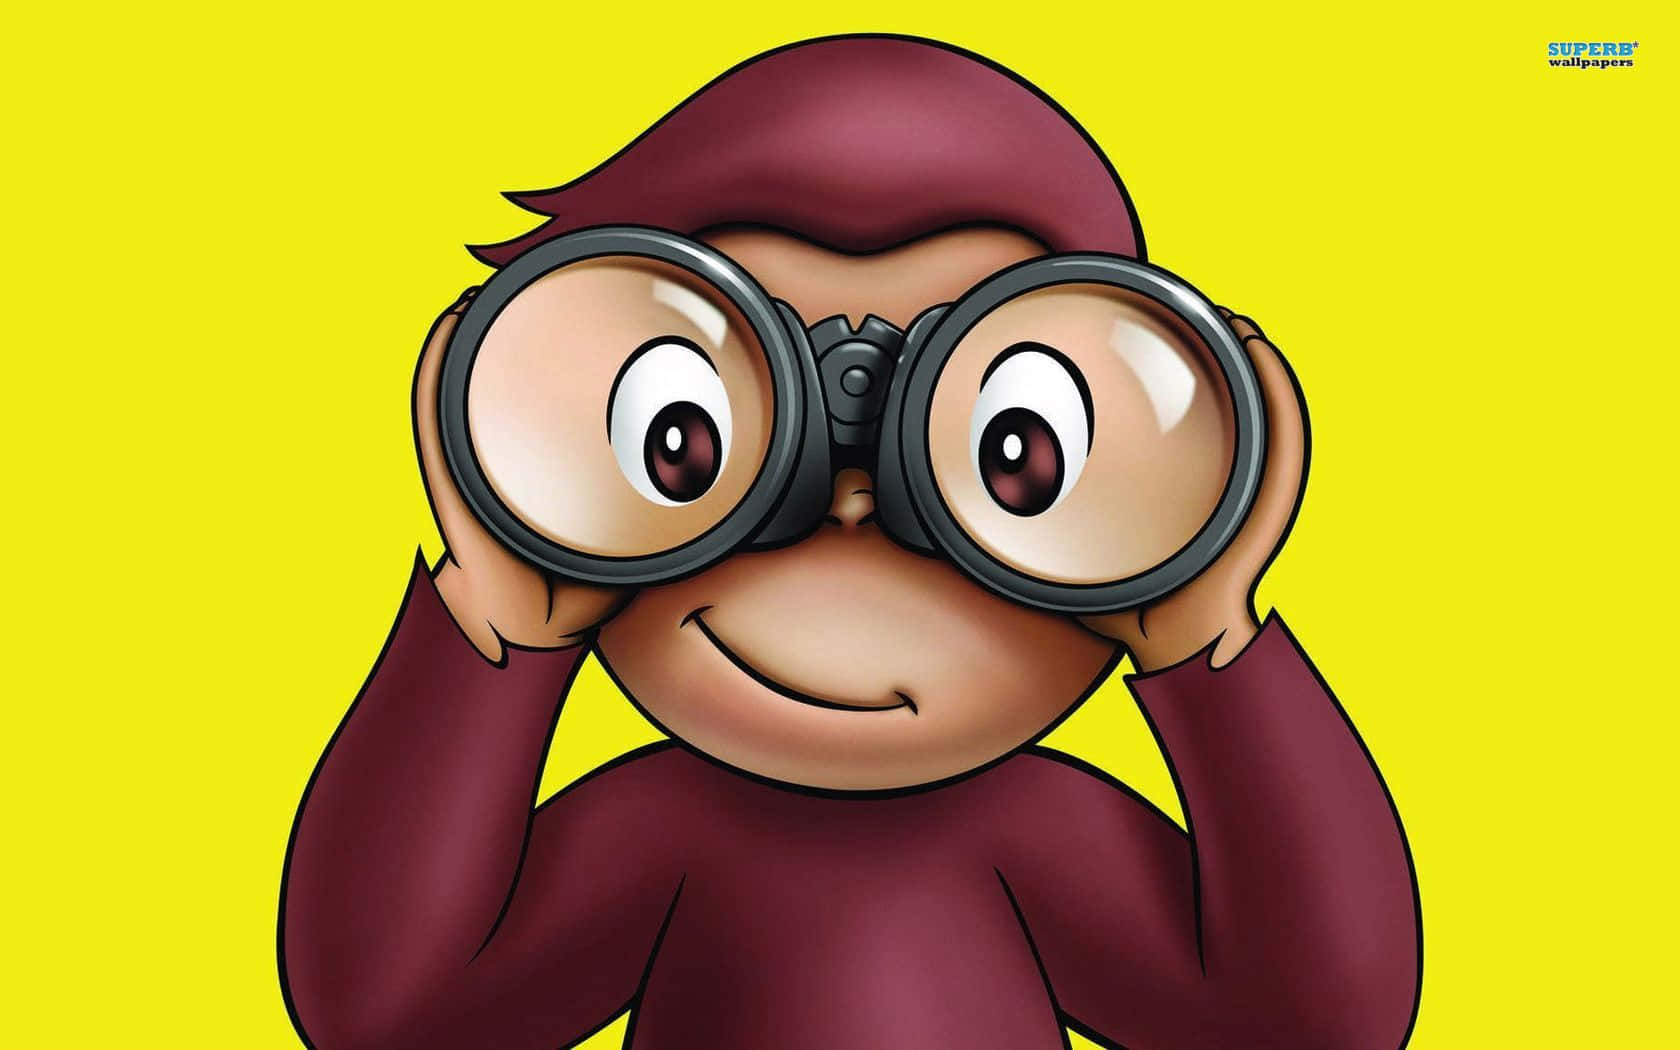 "Explore the World with Curious George!"